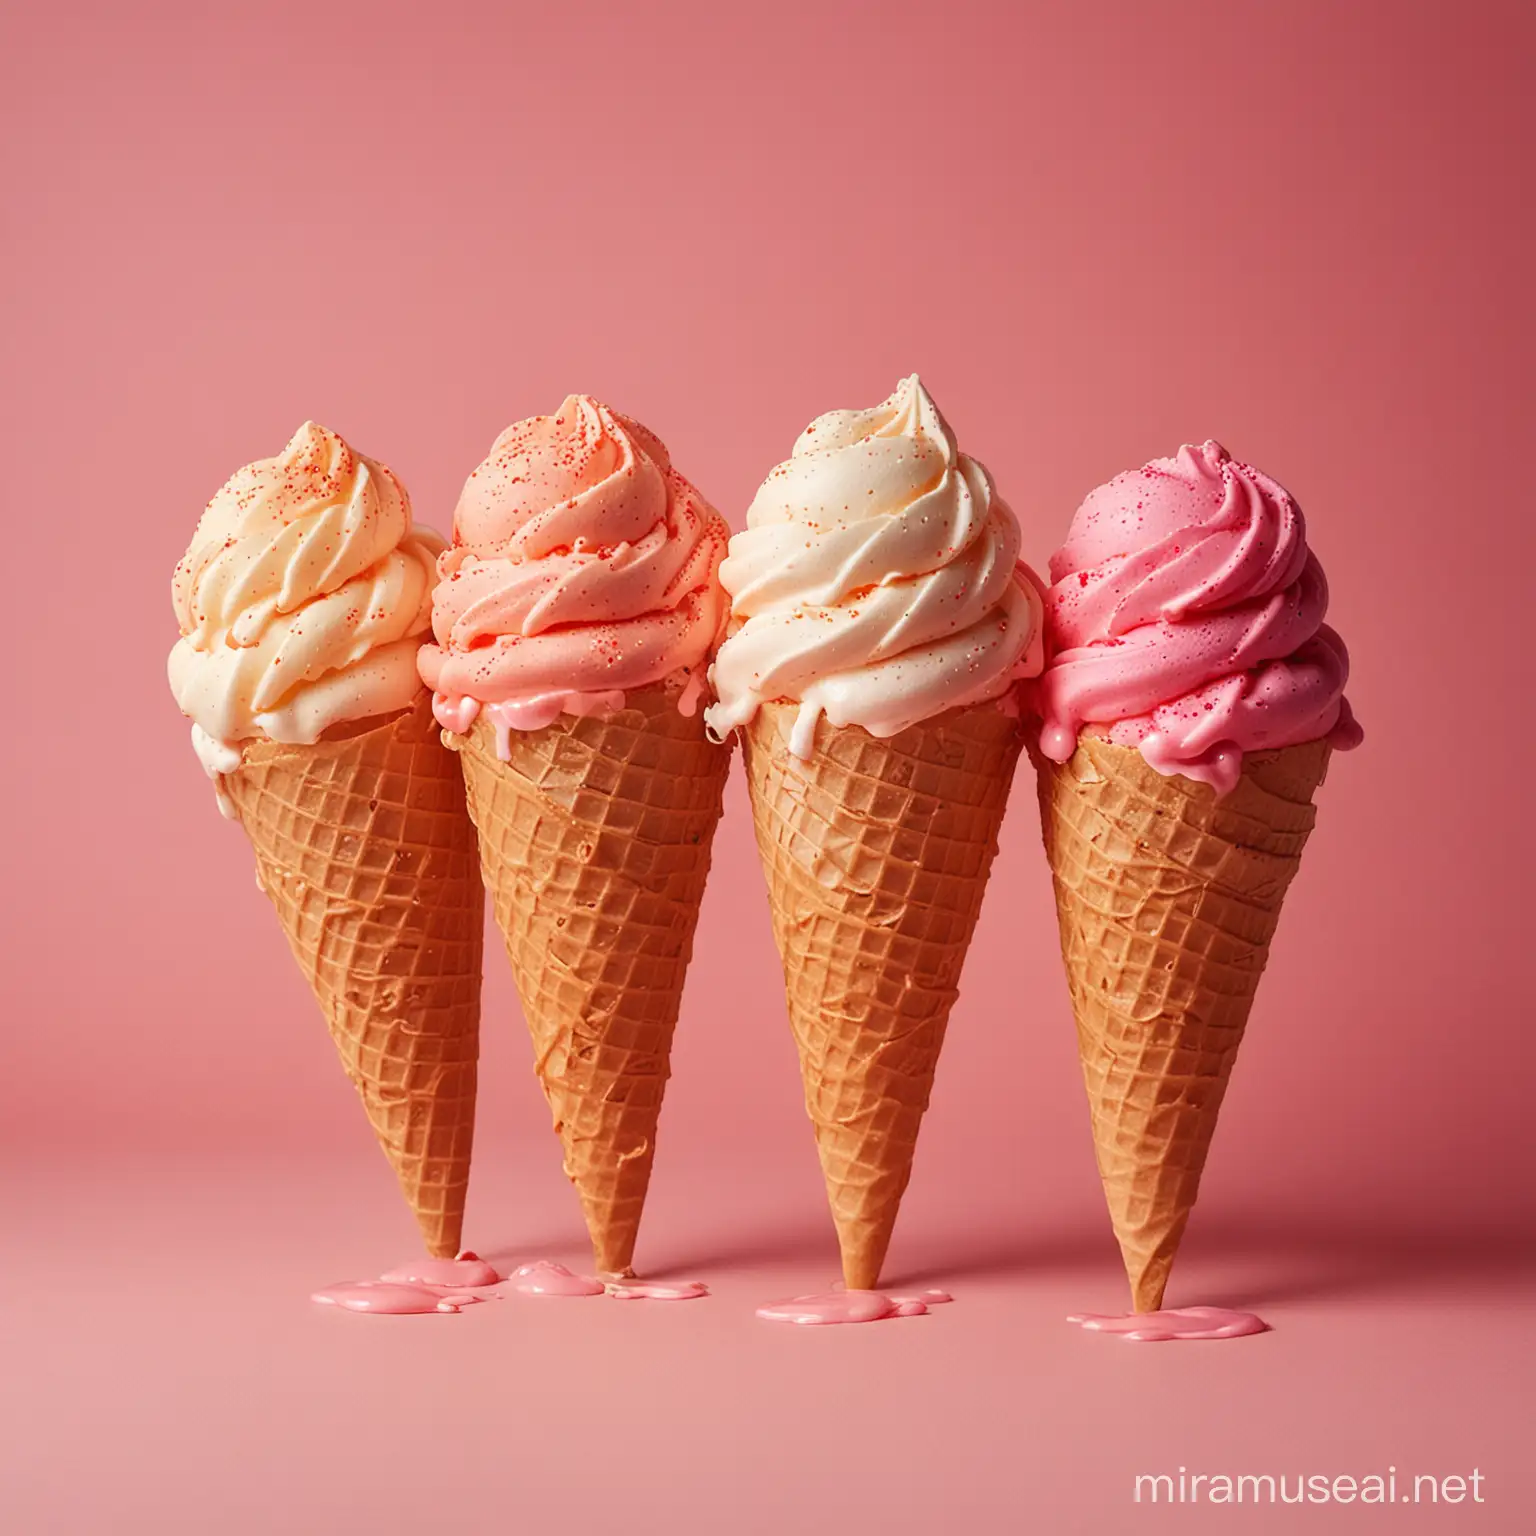 Vibrant Twisted Ice Creams with Splashes and Glows on Light Red Background